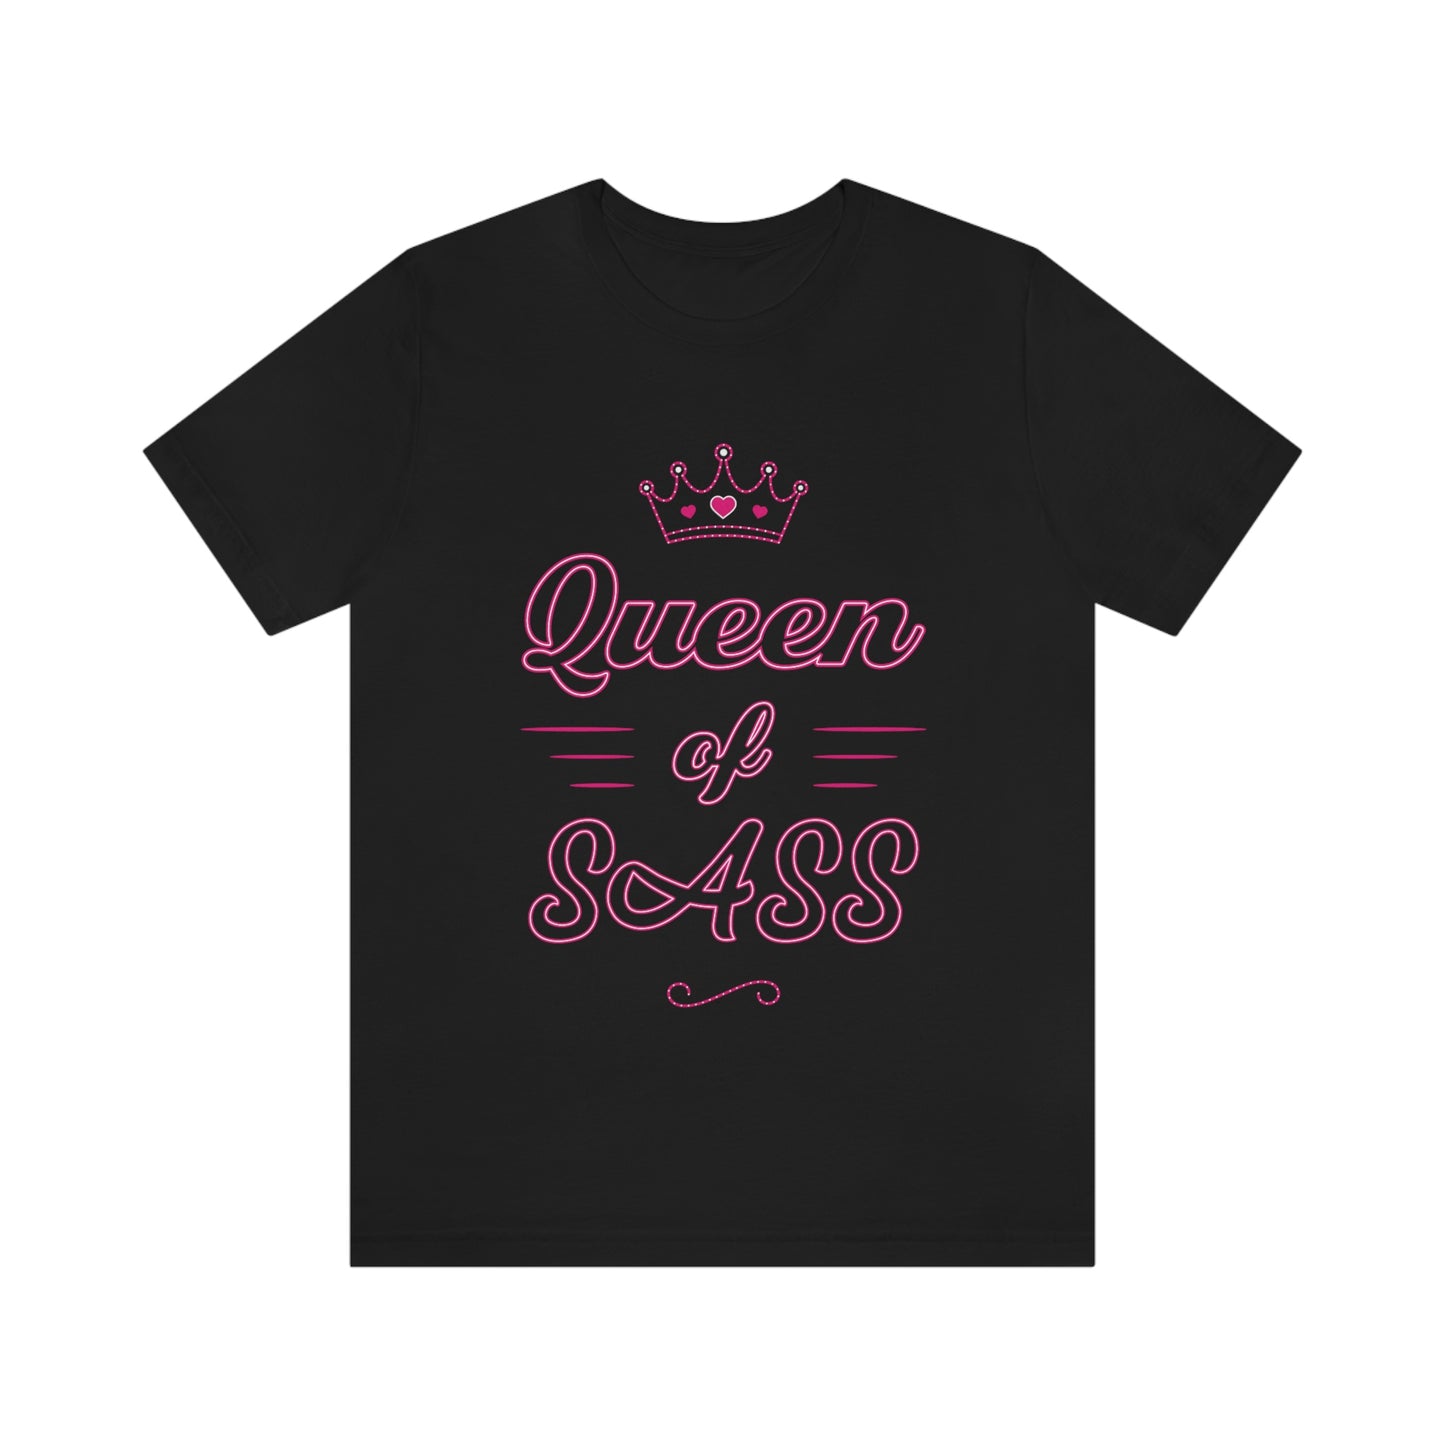 Black T-Shirt with hot pink neon text saying' Queen of Sass'. From the TEQNEON Word Craft collection